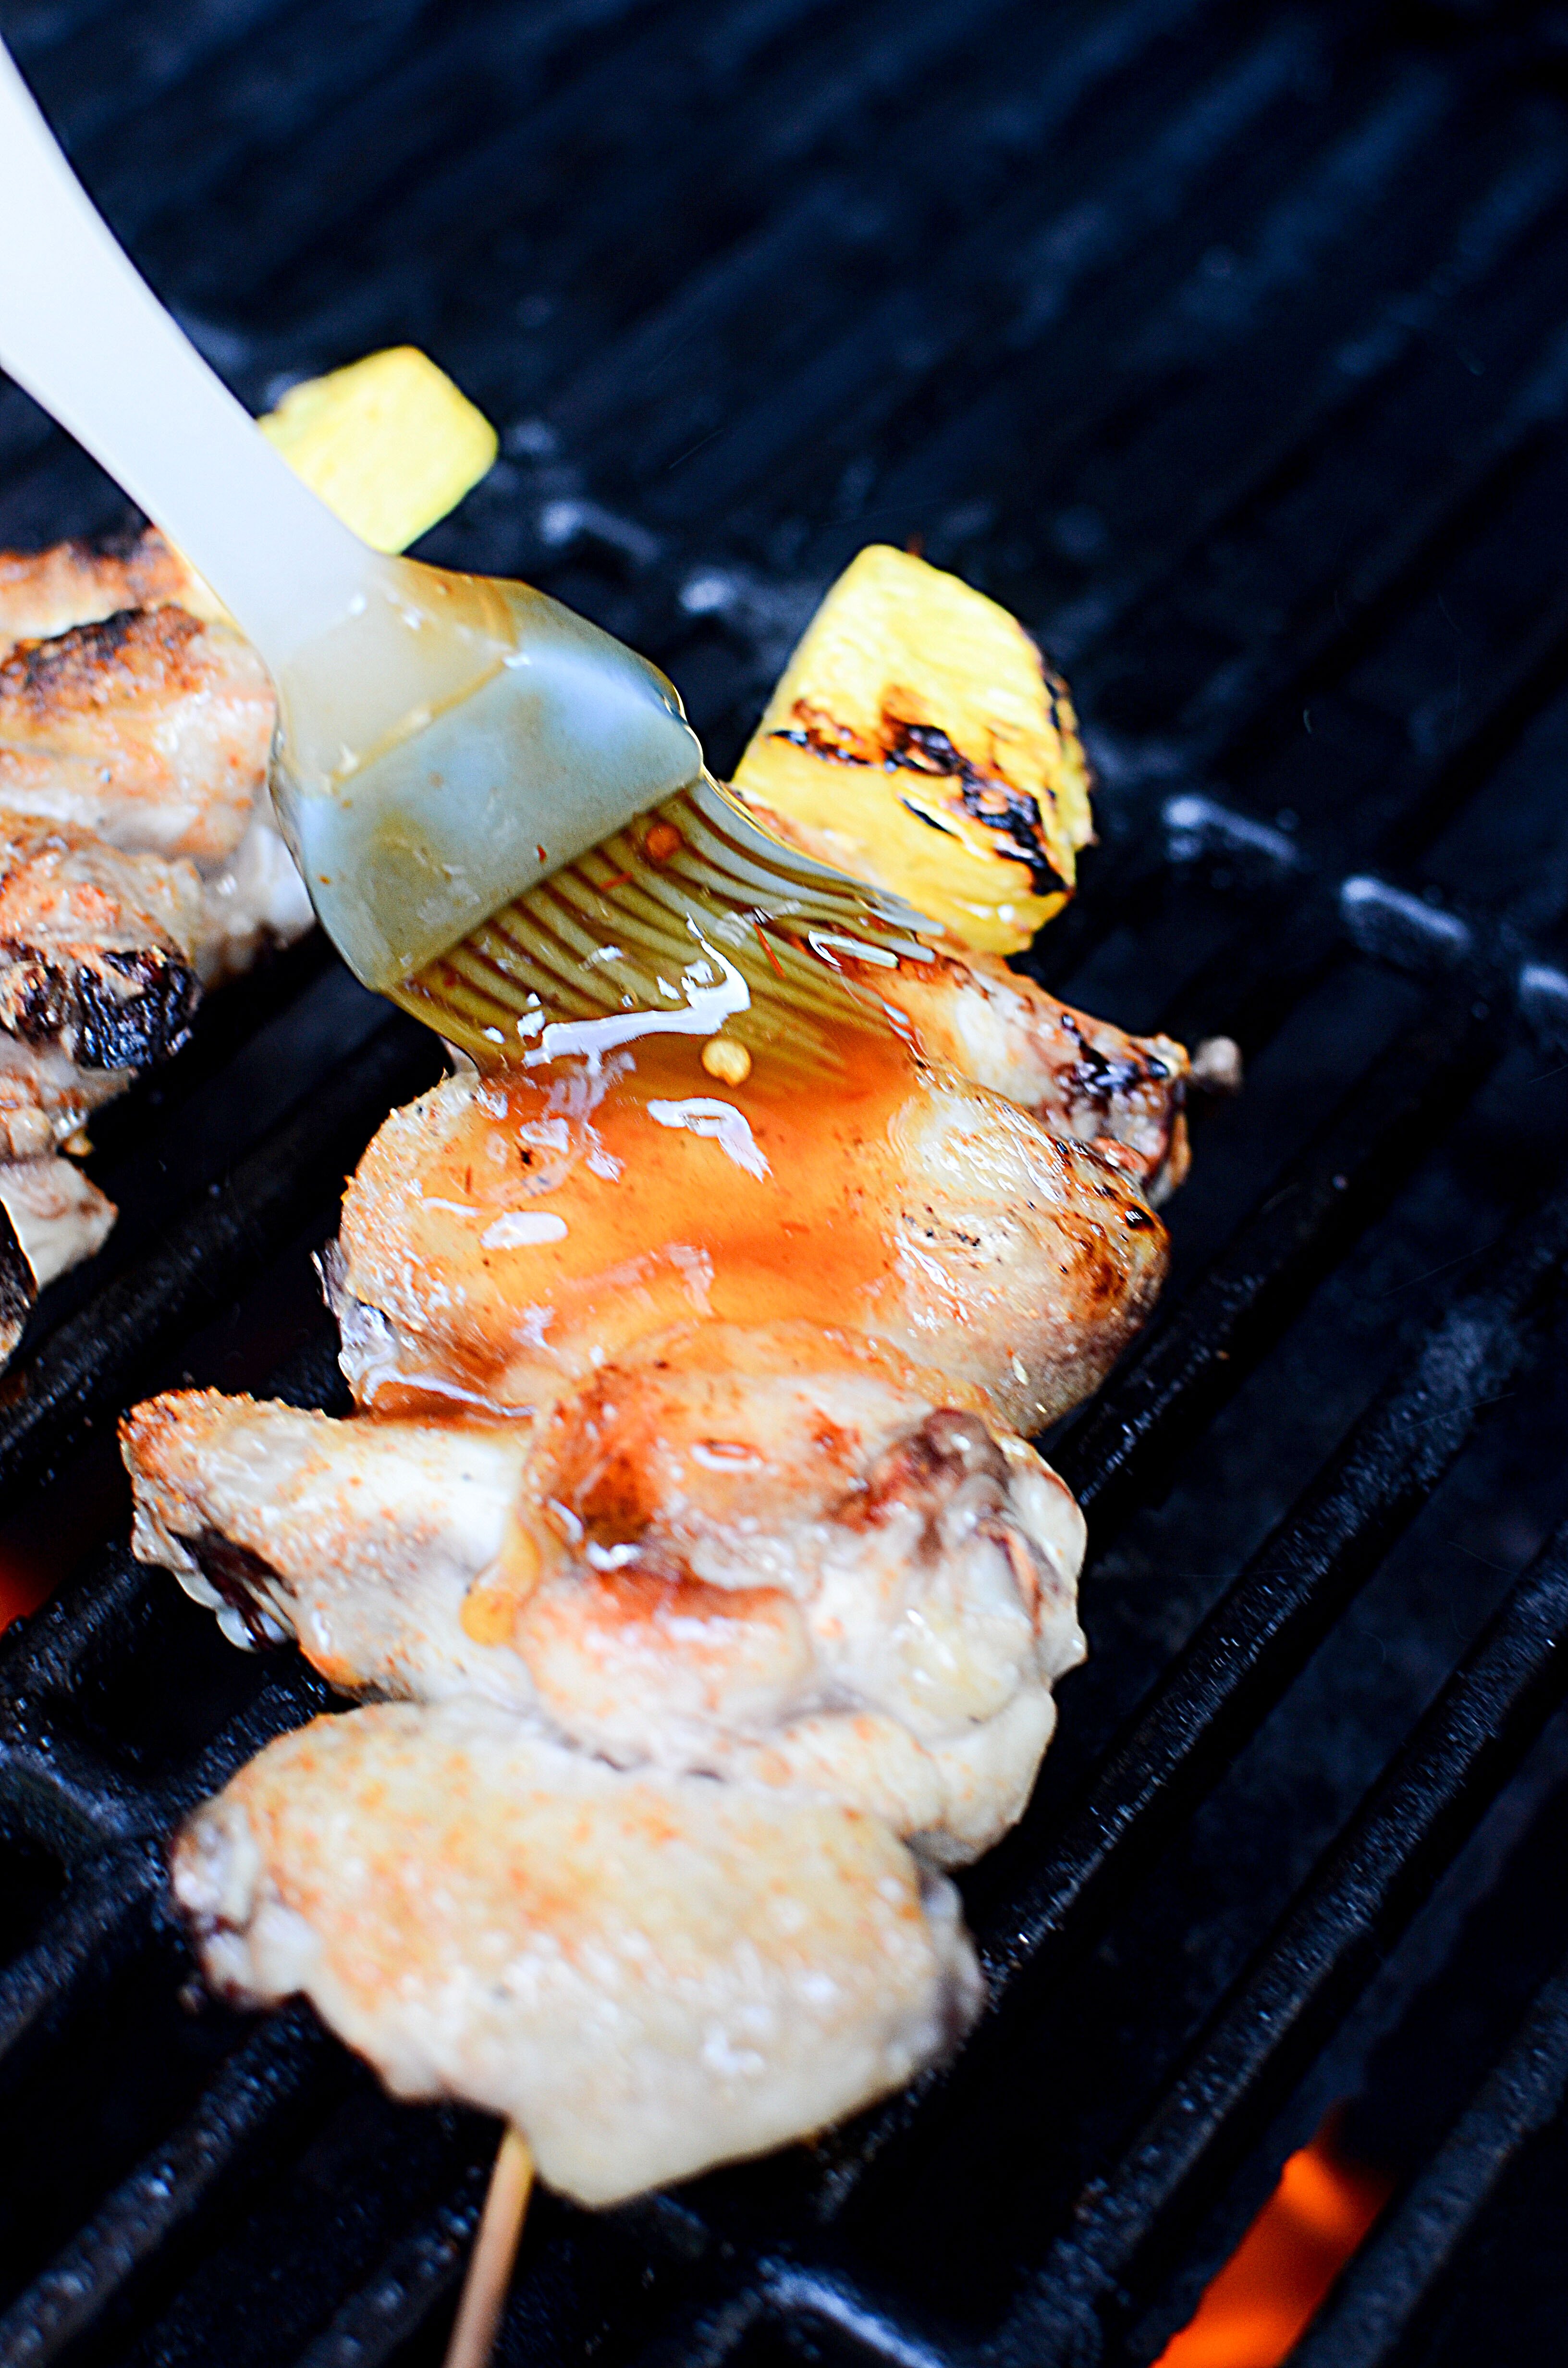 Basting the cooked wings on the grill.